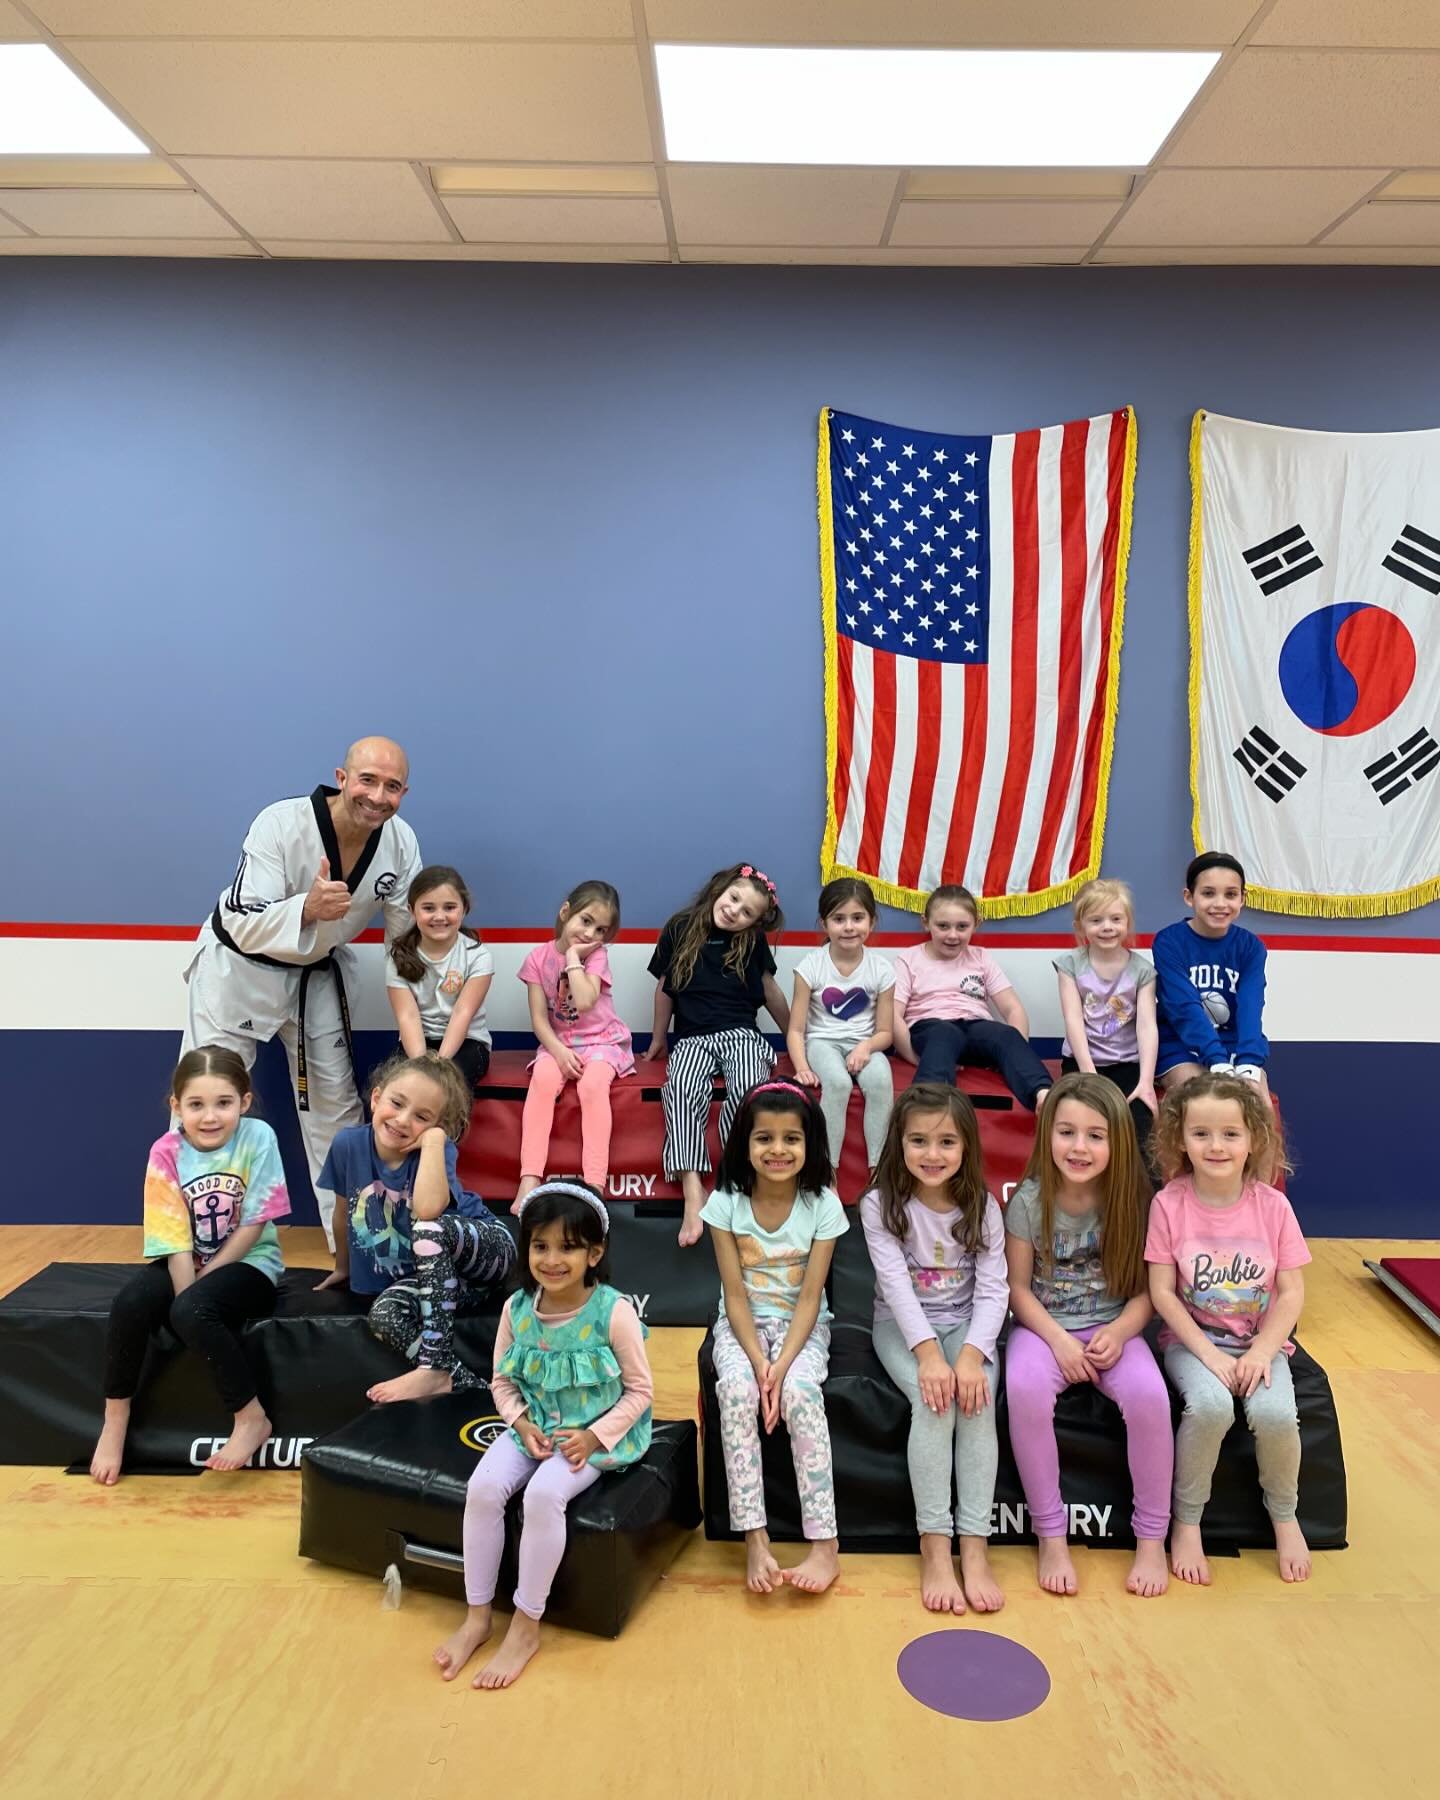 We had a lot of fun with local Girl Scout Troop 01179 this past weekend! Supporting our local community and sharing our passion Taekwondo means so much to us. Thank you all for coming to visit! 

#taekwondo #martialarts #girlscouts #community #giveba